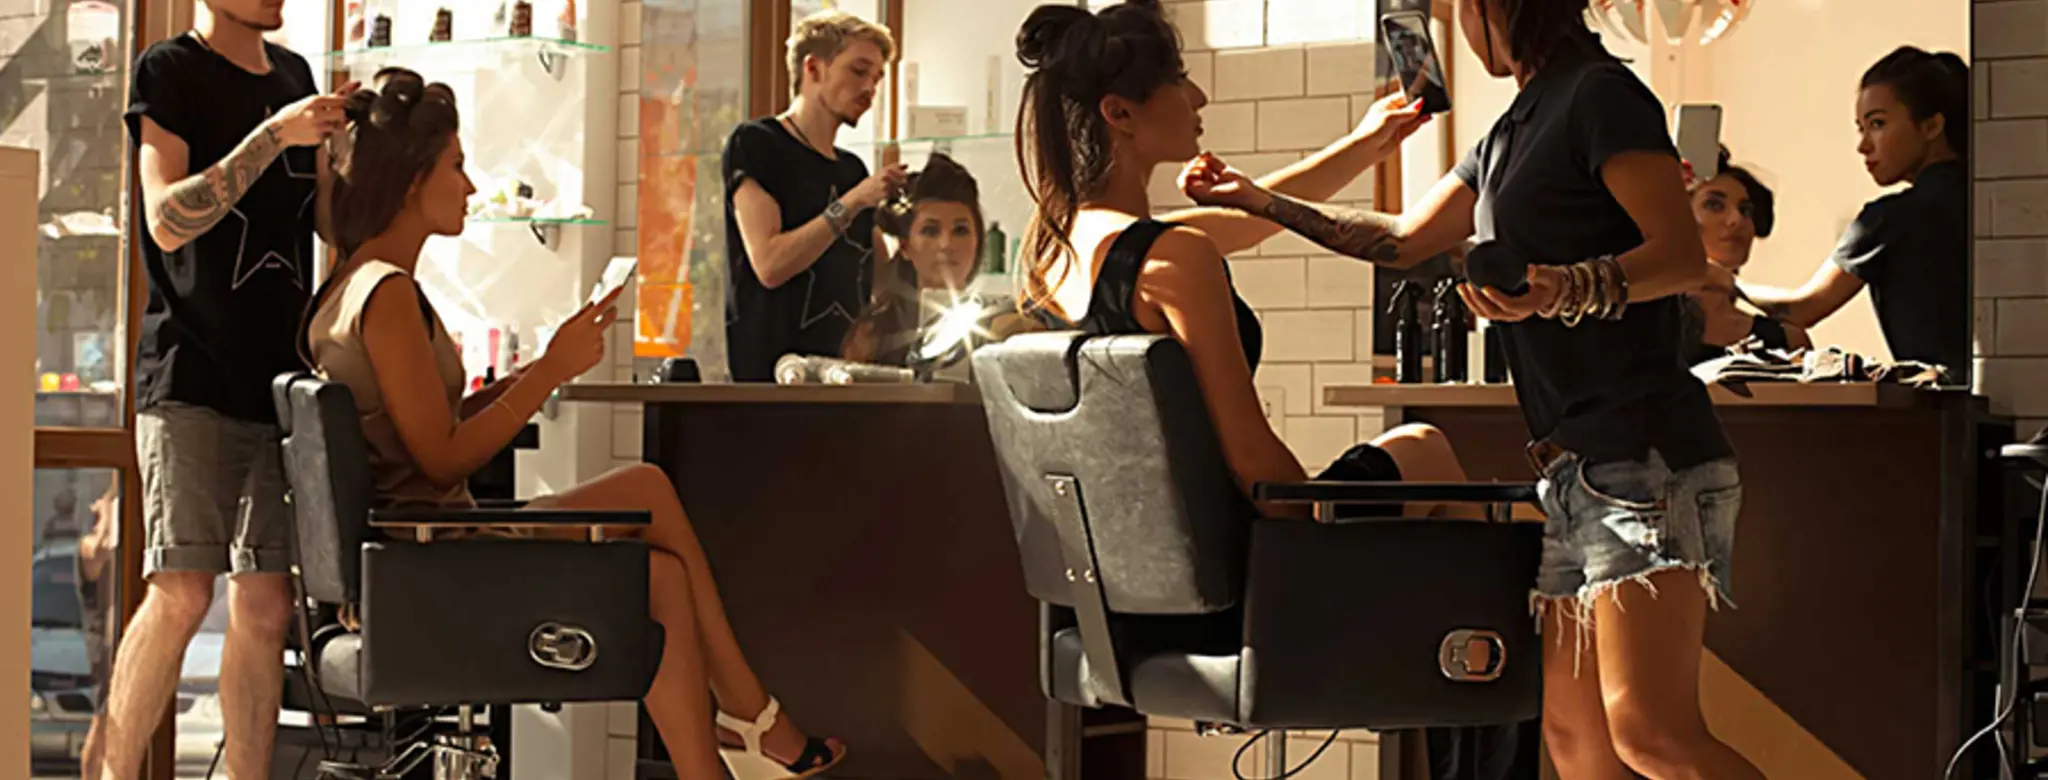 hair stylists sitting in chairs in salon